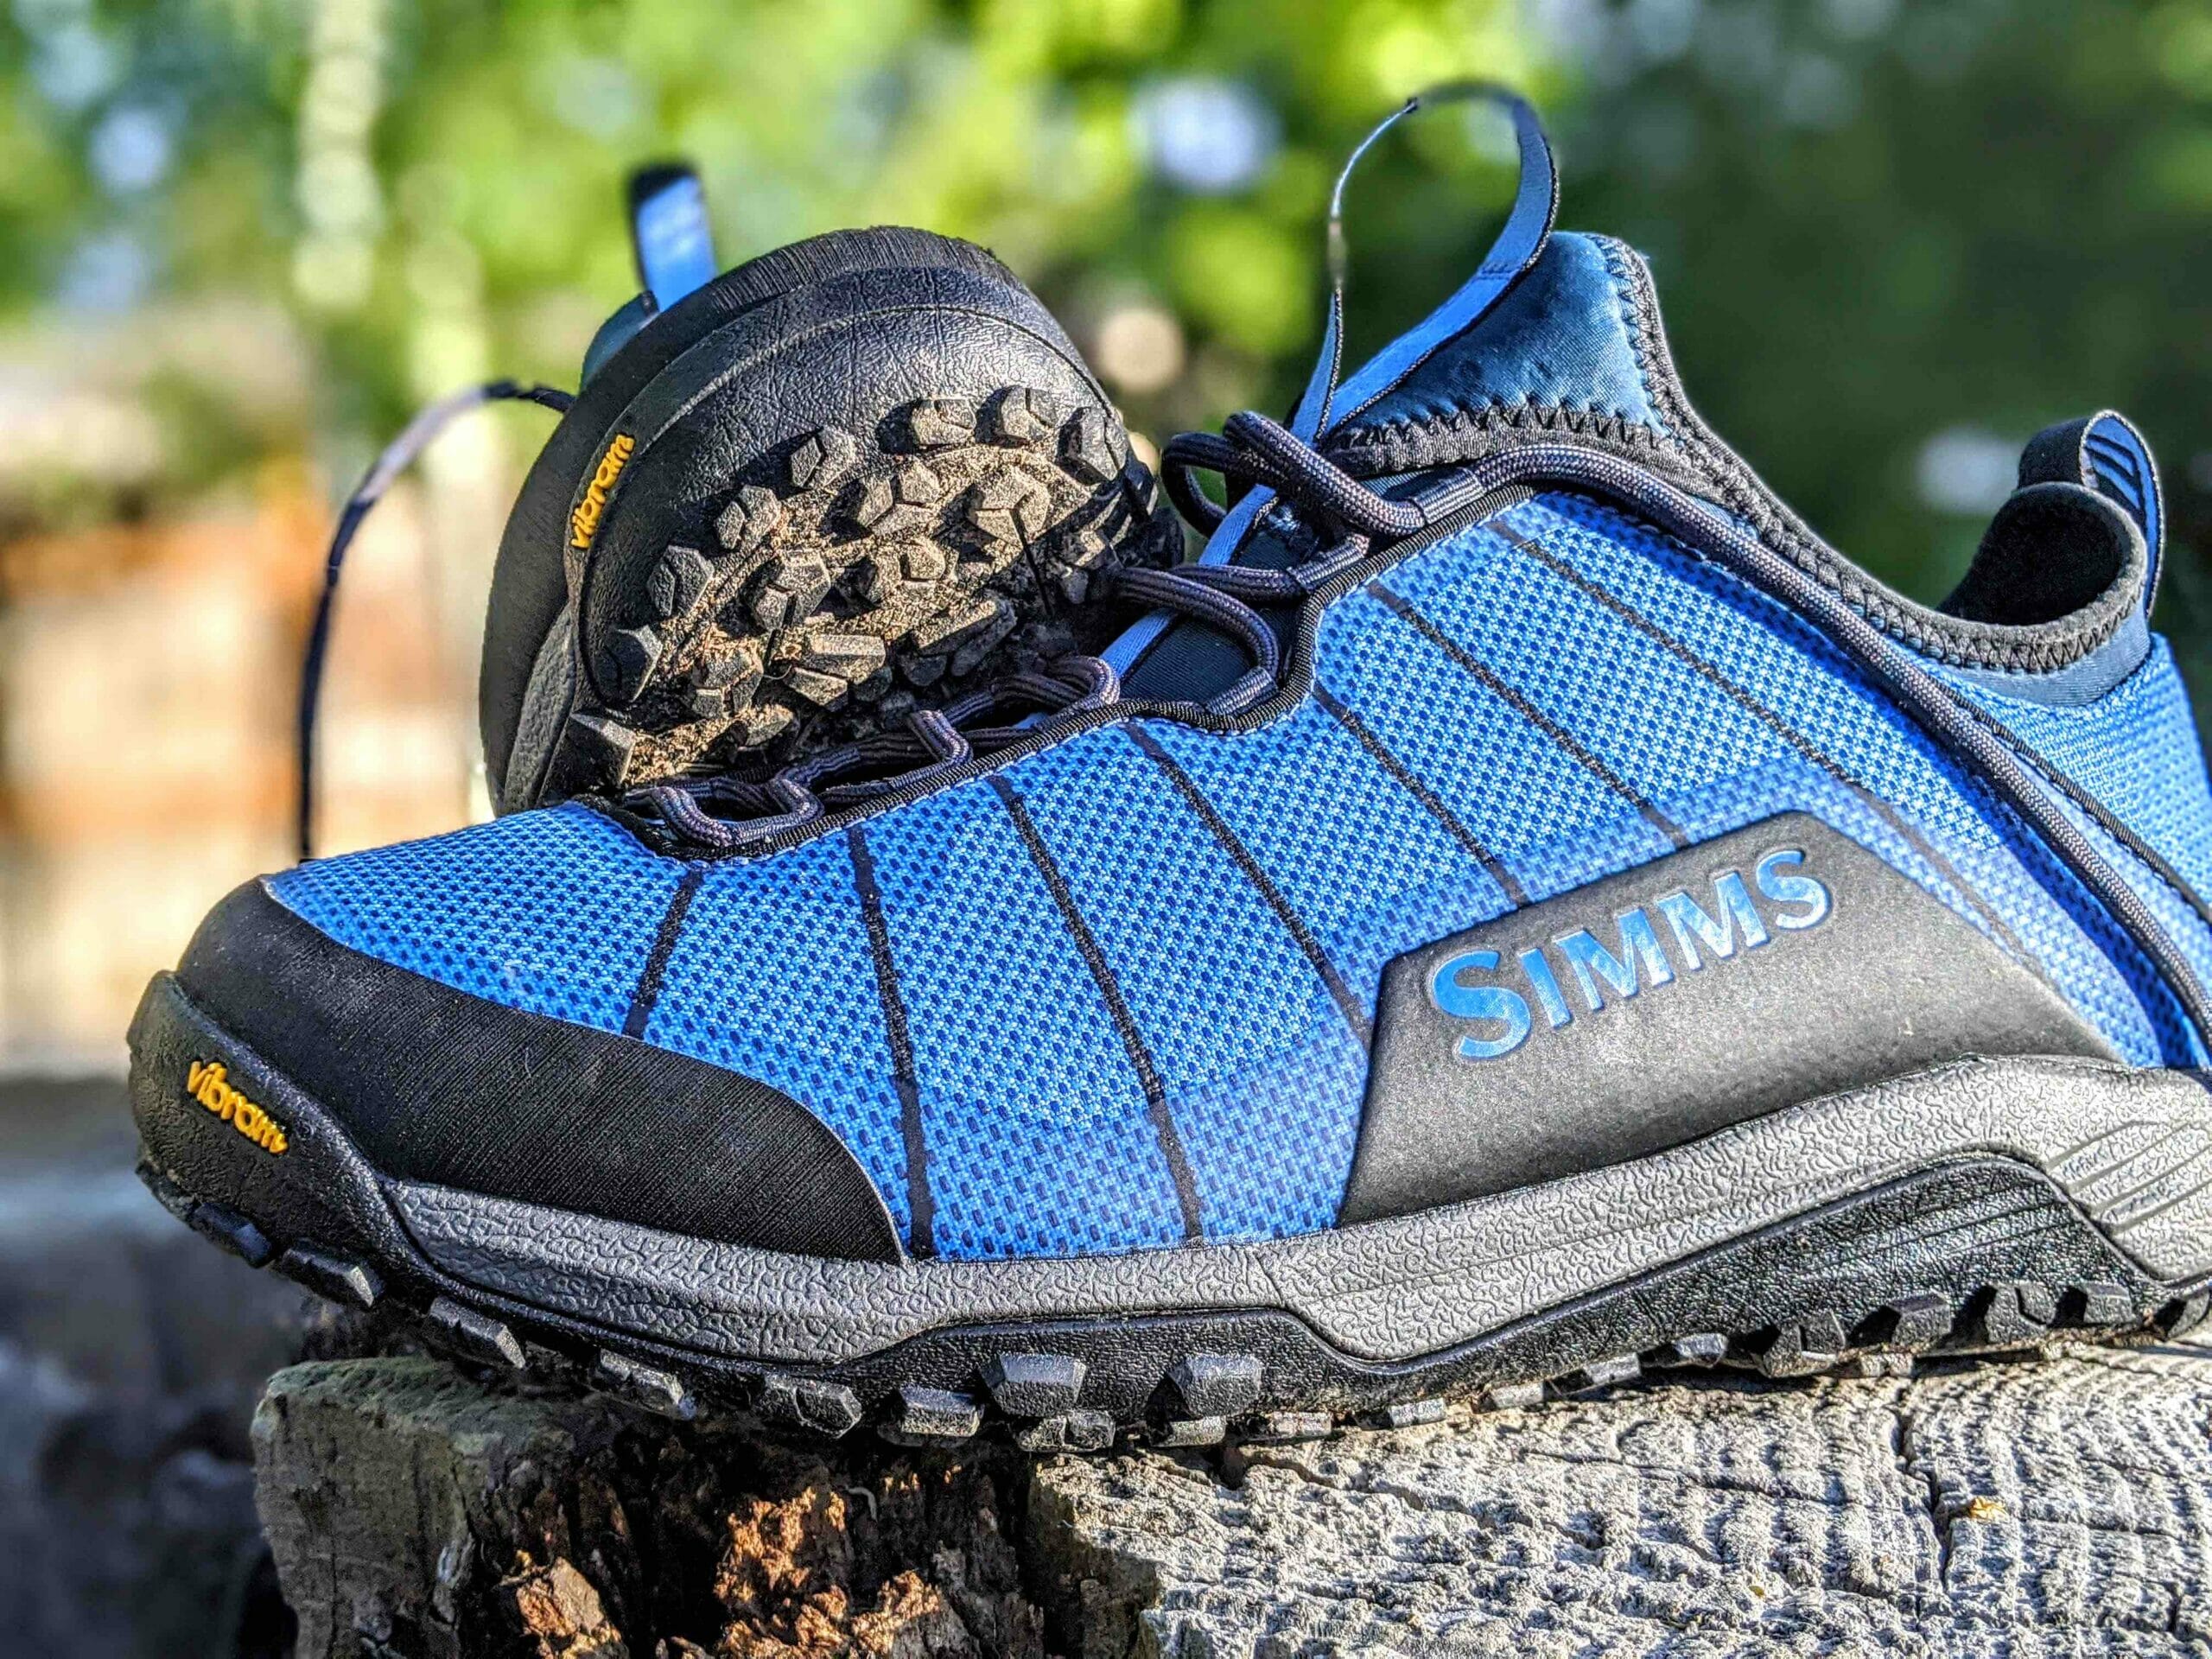 Best wet wading Fishing shoes by @Fishing_Diary - Listium